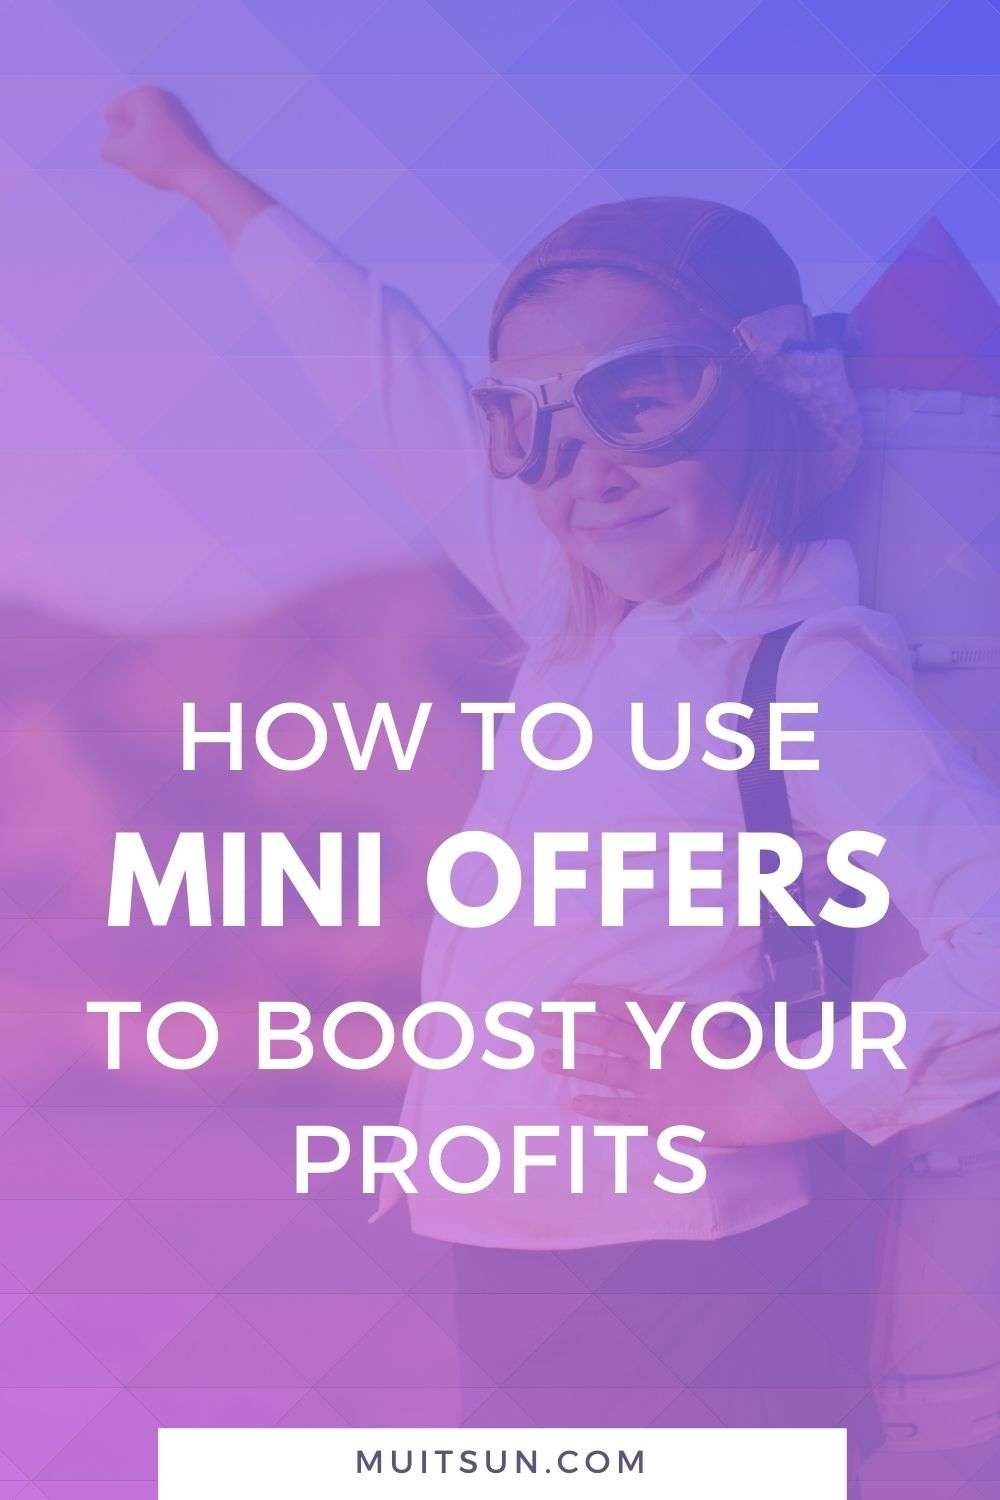 Use Mini Offers to Boost Your Profits